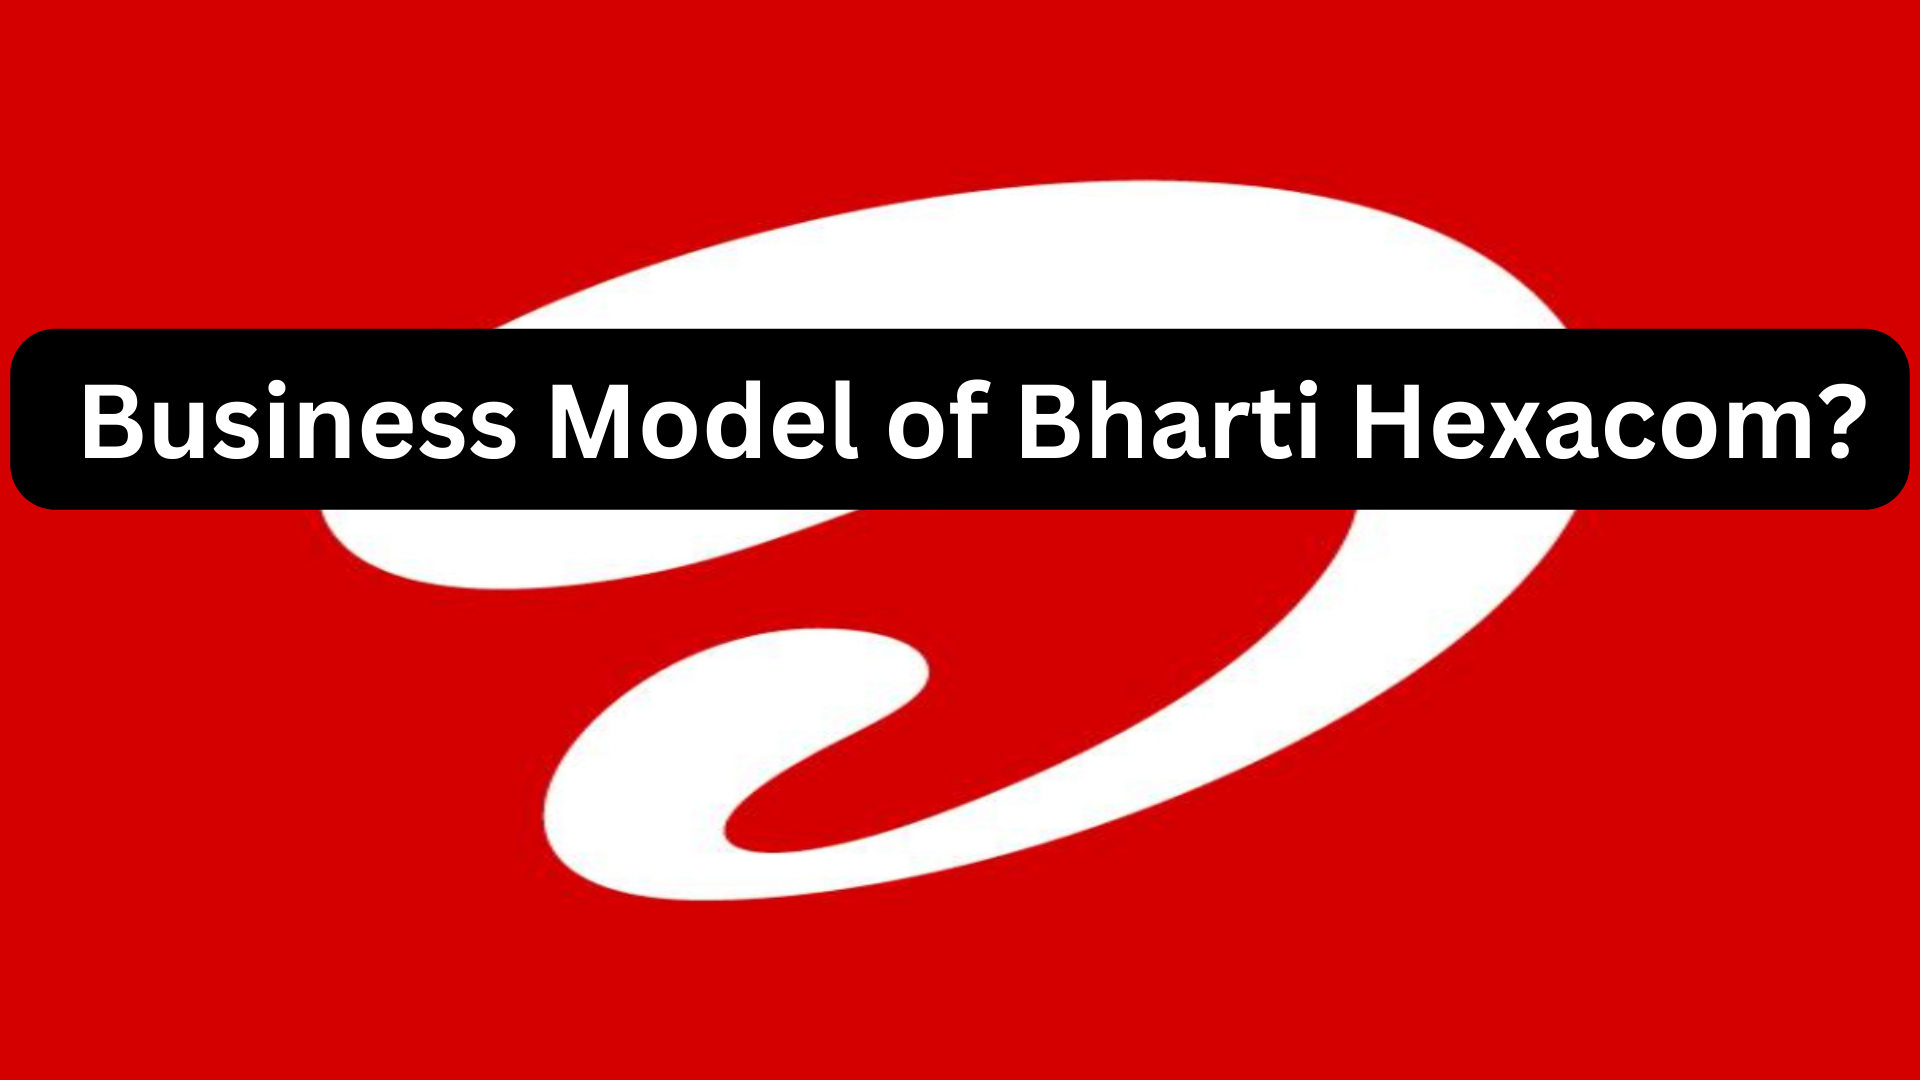 What is the Business Model of Bharti Hexacom? Bharti Hexacom is a subsidiary of Bharti Airtel, one of the leading telecommunications companies in India.